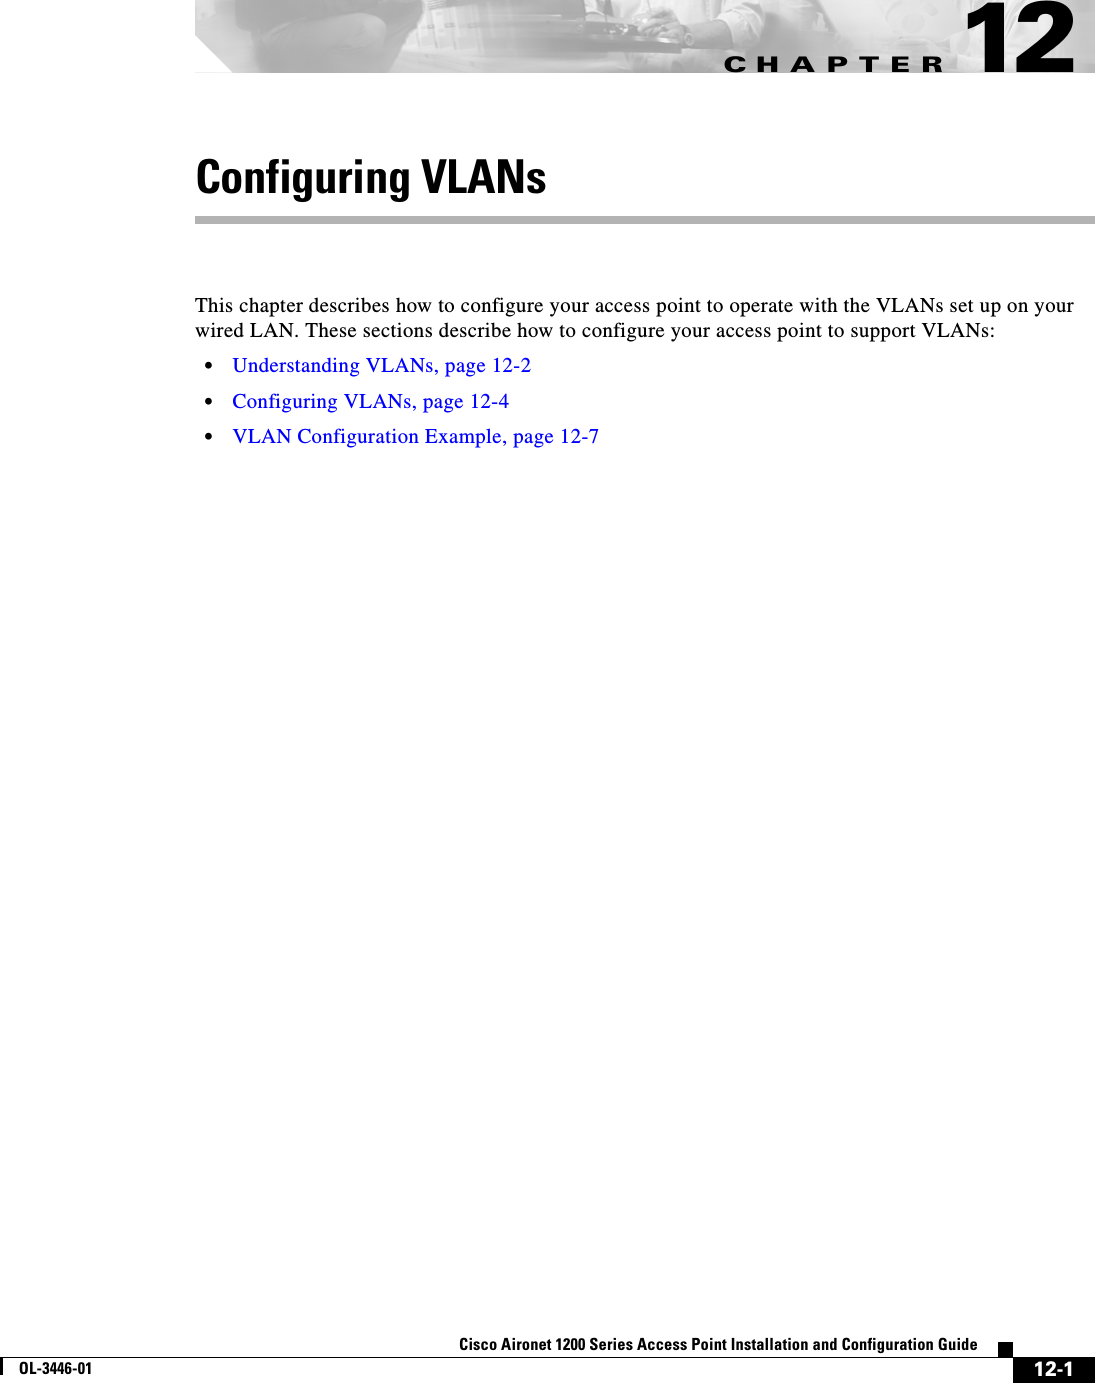 CHAPTER12-1Cisco Aironet 1200 Series Access Point Installation and Configuration GuideOL-3446-0112Configuring VLANsThis chapter describes how to configure your access point to operate with the VLANs set up on your wired LAN. These sections describe how to configure your access point to support VLANs:•Understanding VLANs, page 12-2•Configuring VLANs, page 12-4•VLAN Configuration Example, page 12-7